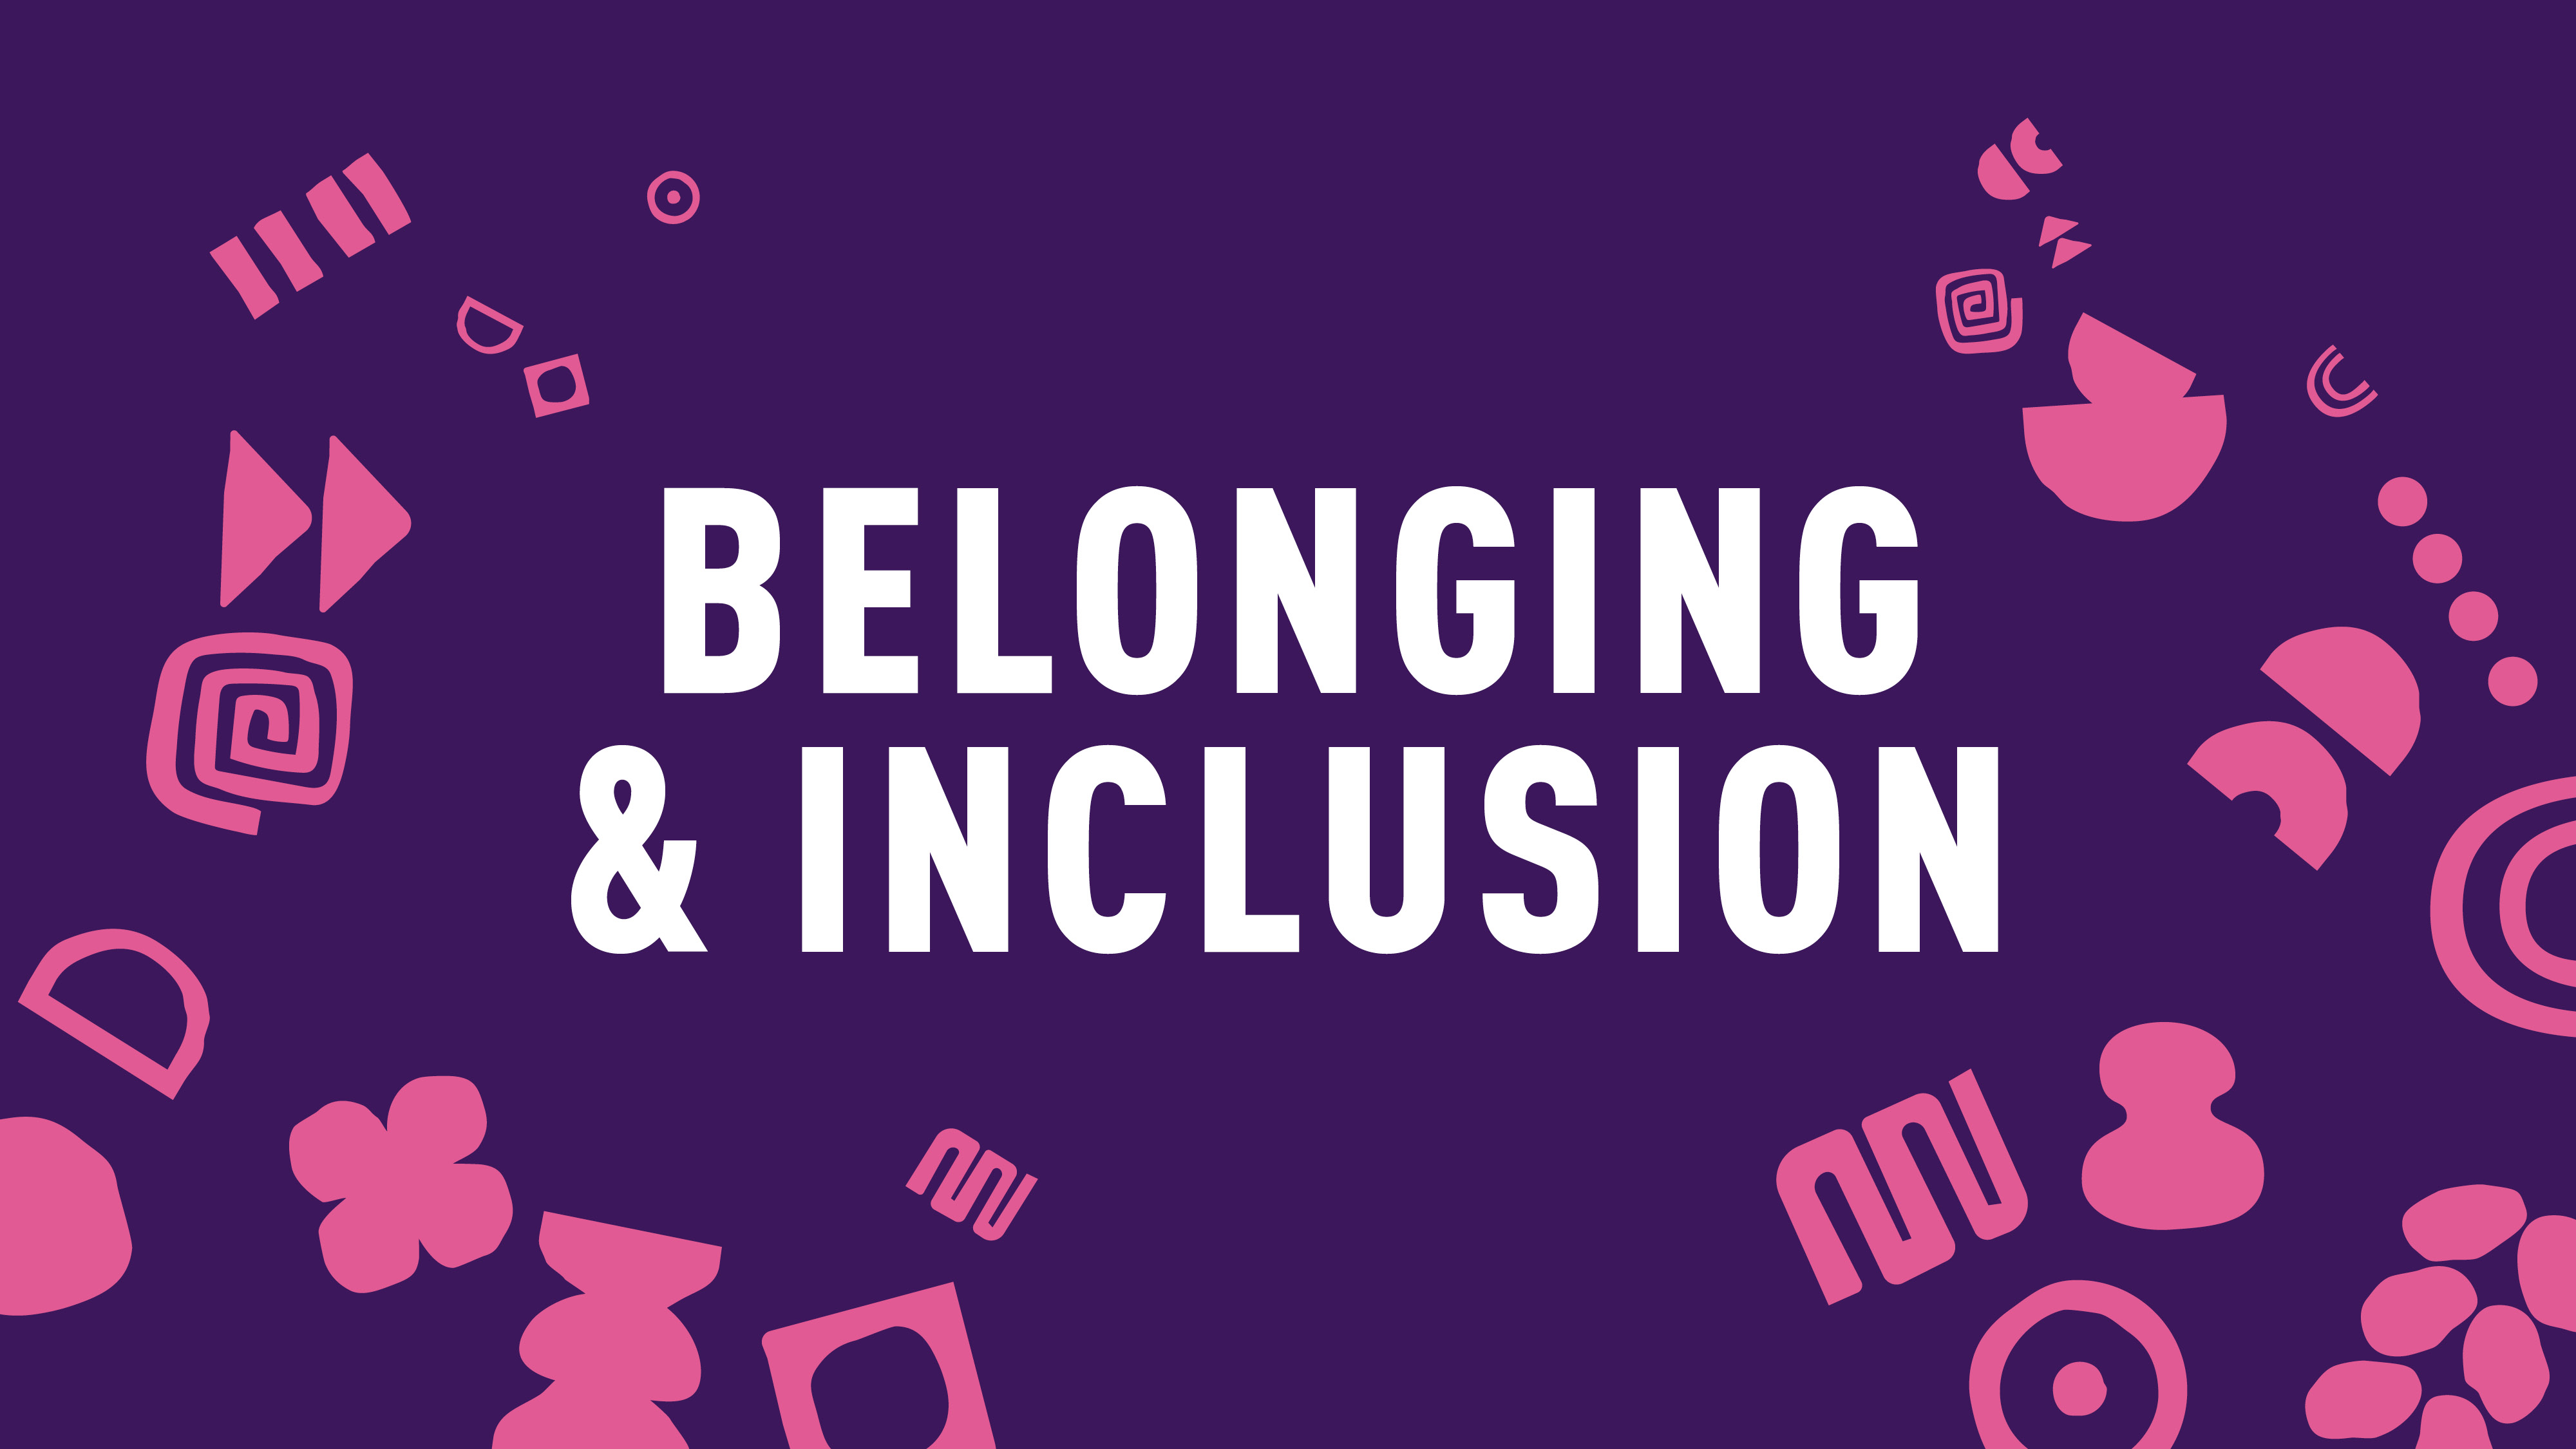 Purple background with pink shapes floating around the words 'Belonging and Inclusion'.